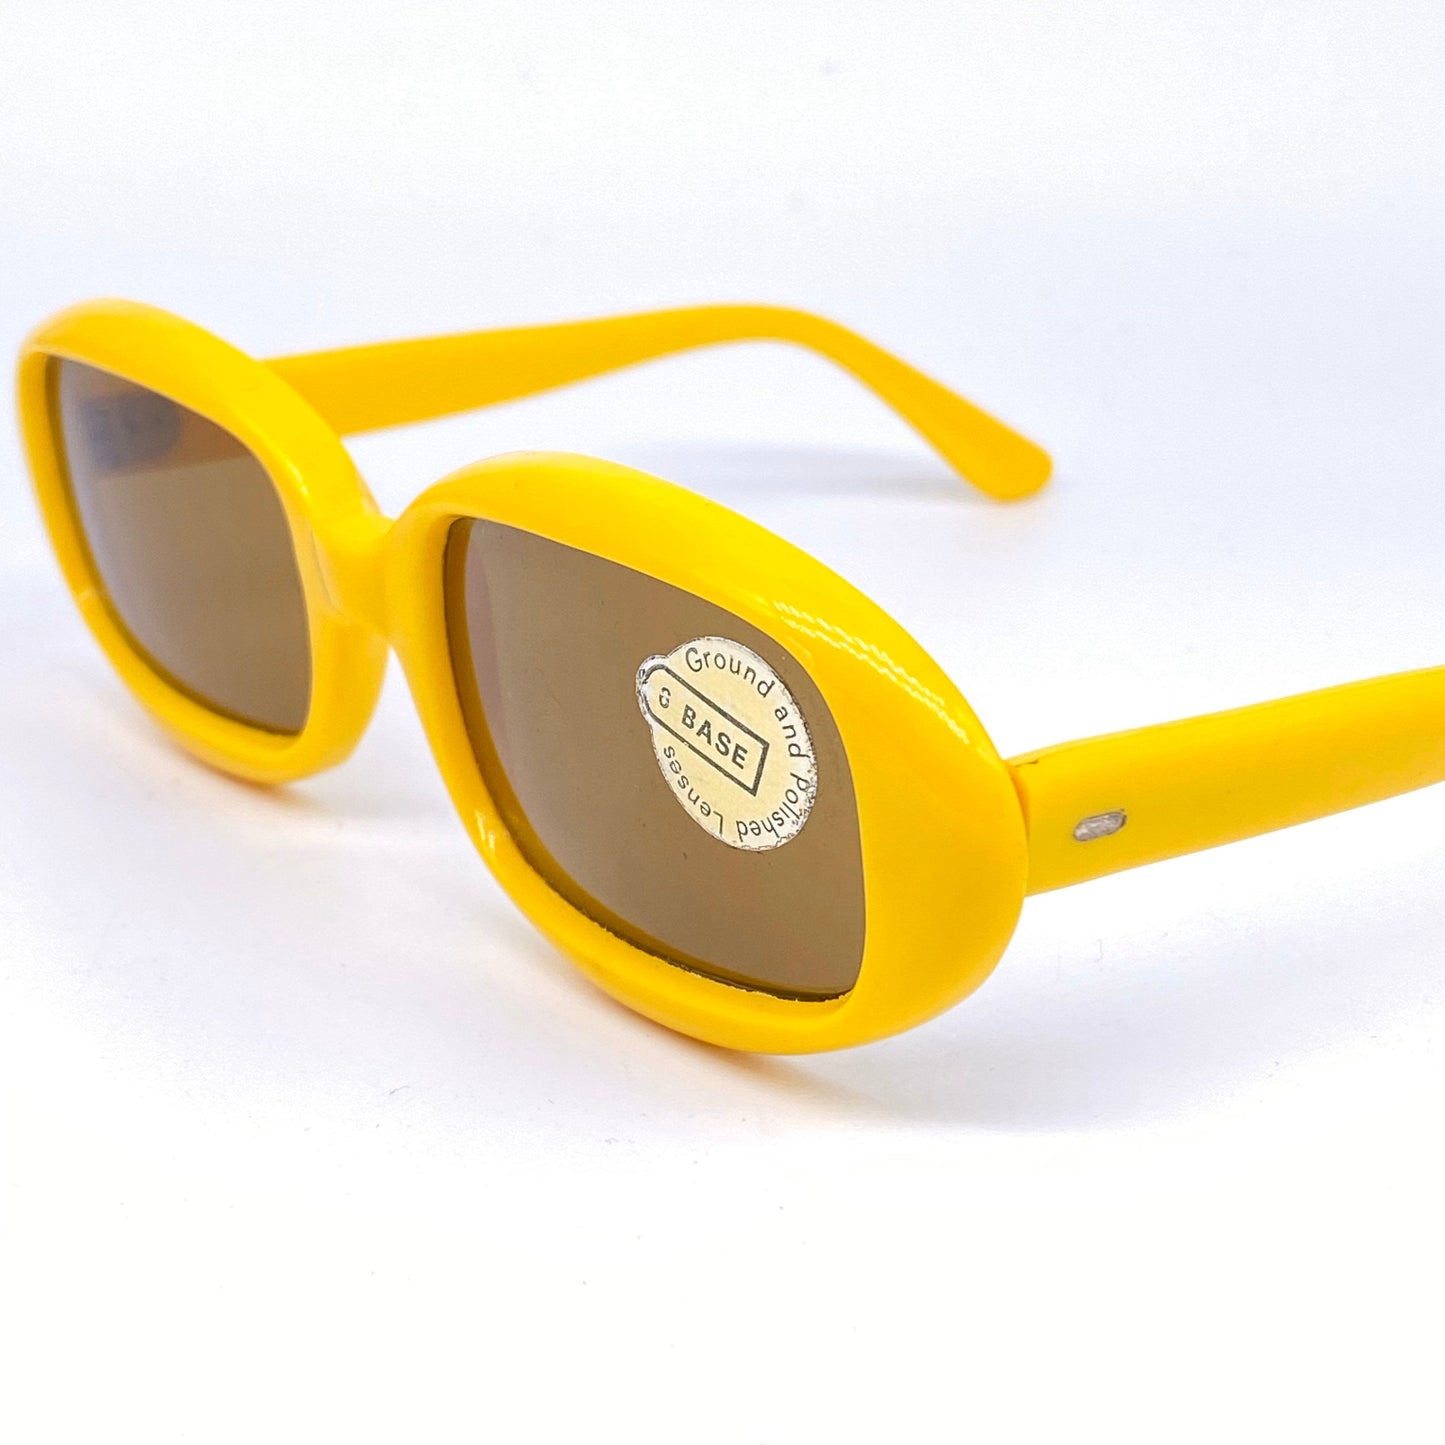 1960s NOS colorful Mod oval sunglasses with square lenses cut, coming in pink or yellow